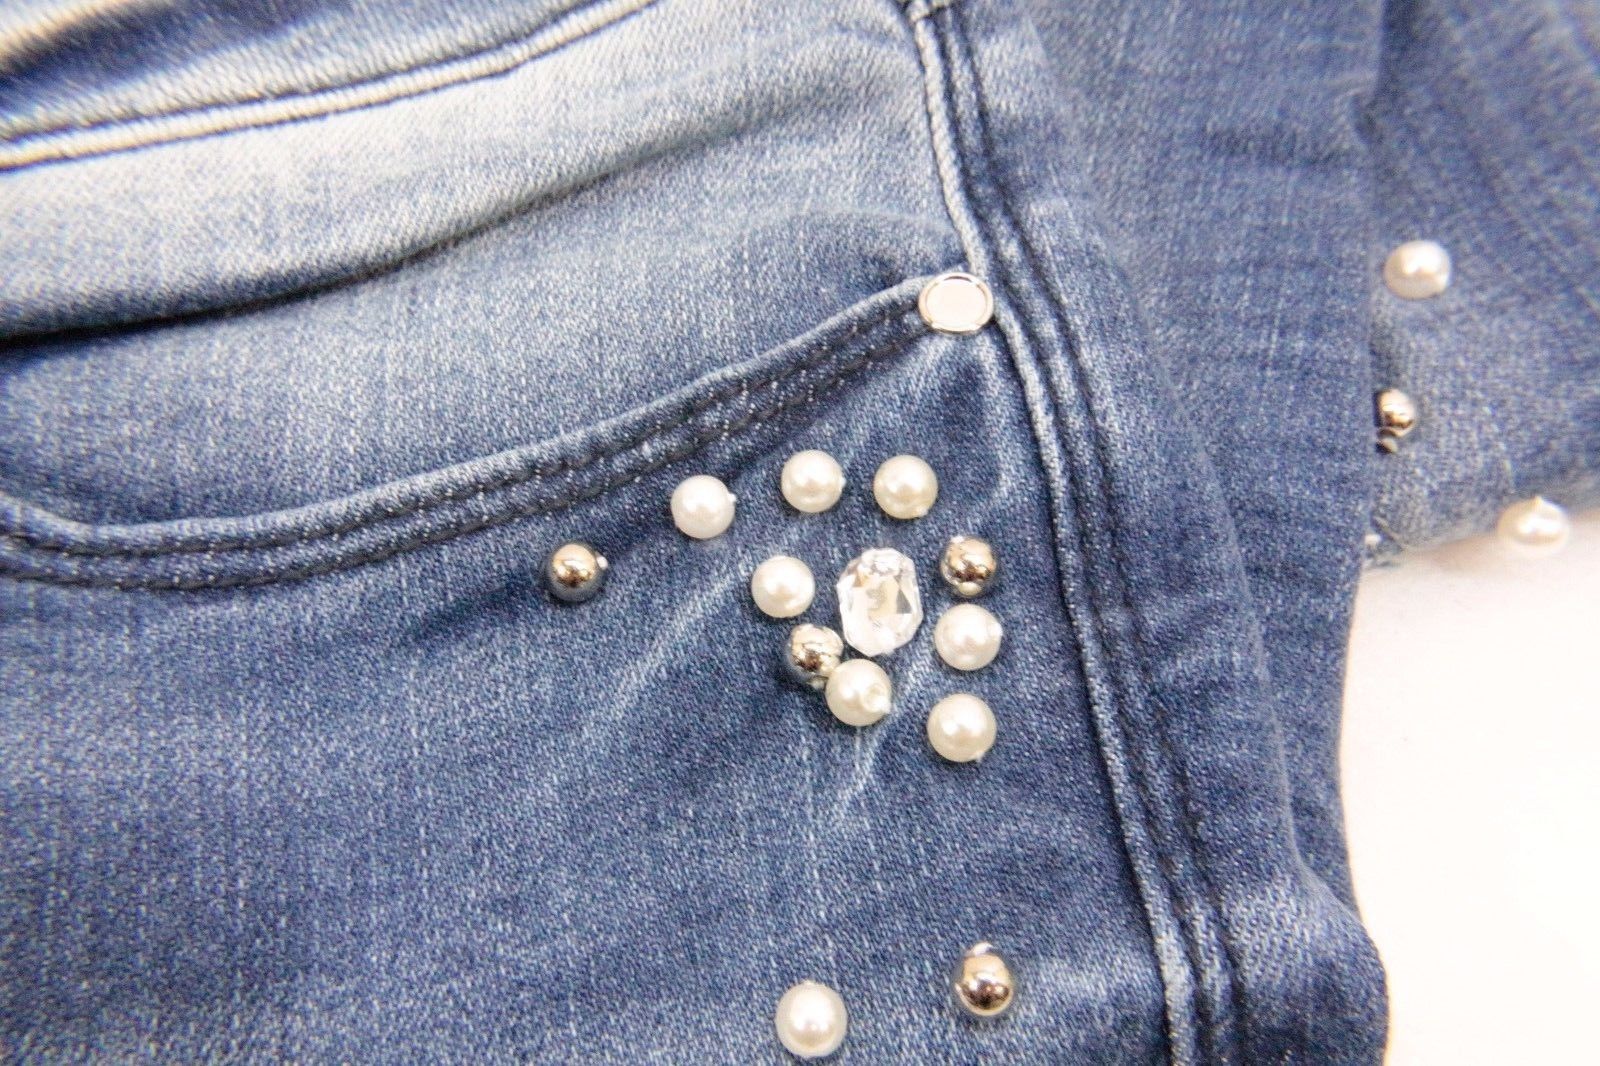 bebe jeans with pearls